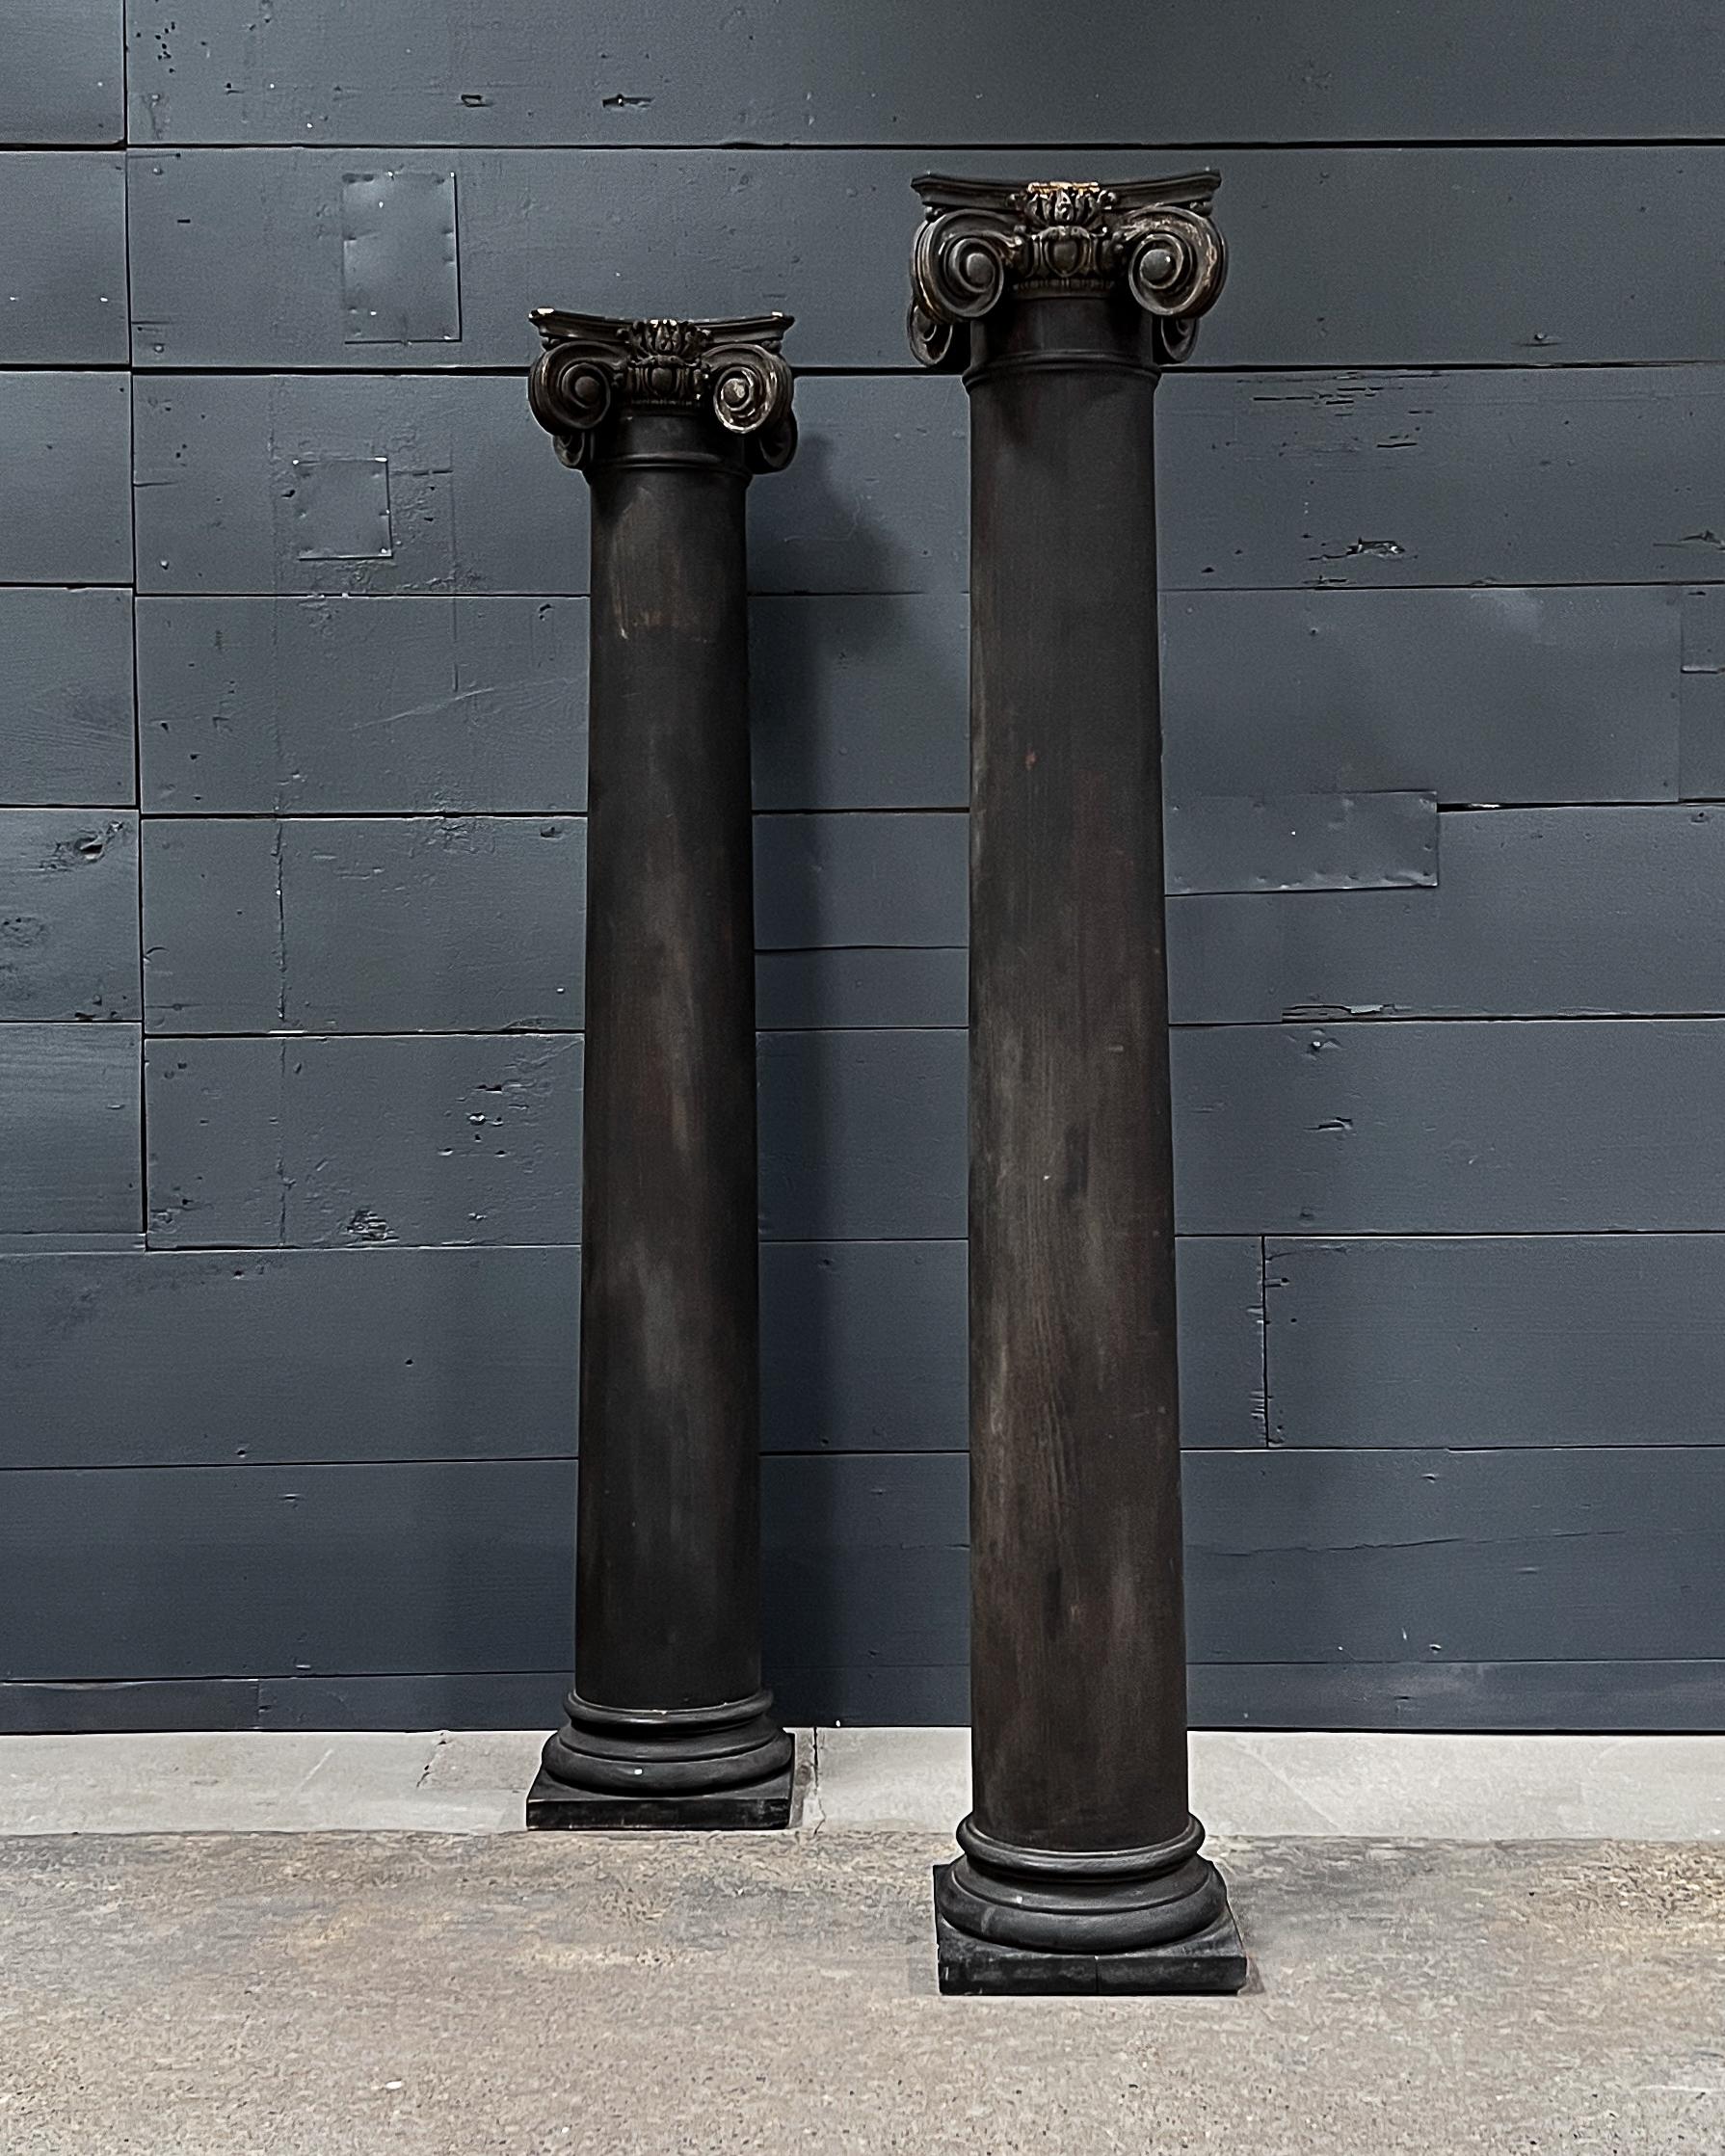 Wonderful old ionic columns salvaged from an old stately home in Nebraska. The ebonized columns are constructed from solid wood and are showing signs of craquelure, and great patina! Their streamlined dignified form, topped with scroll-shaped